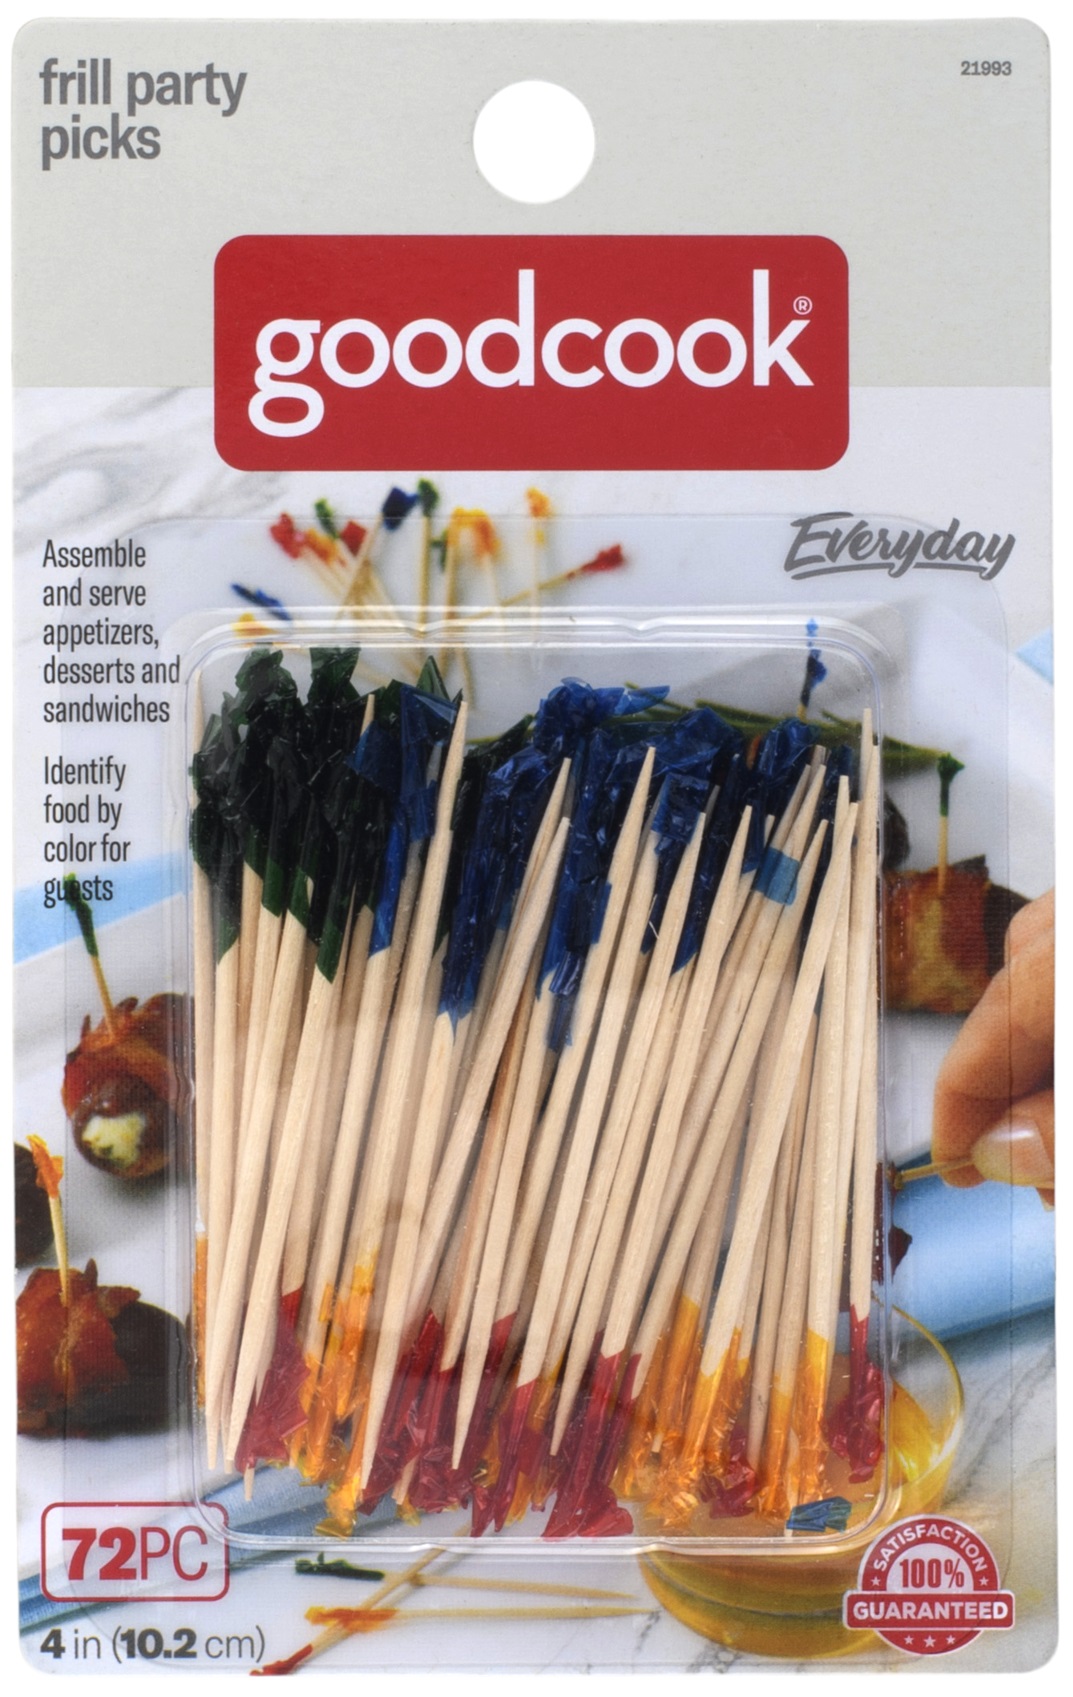 21993_GoodCook_Everyday_Frill Party Picks_Packaging 1.psd